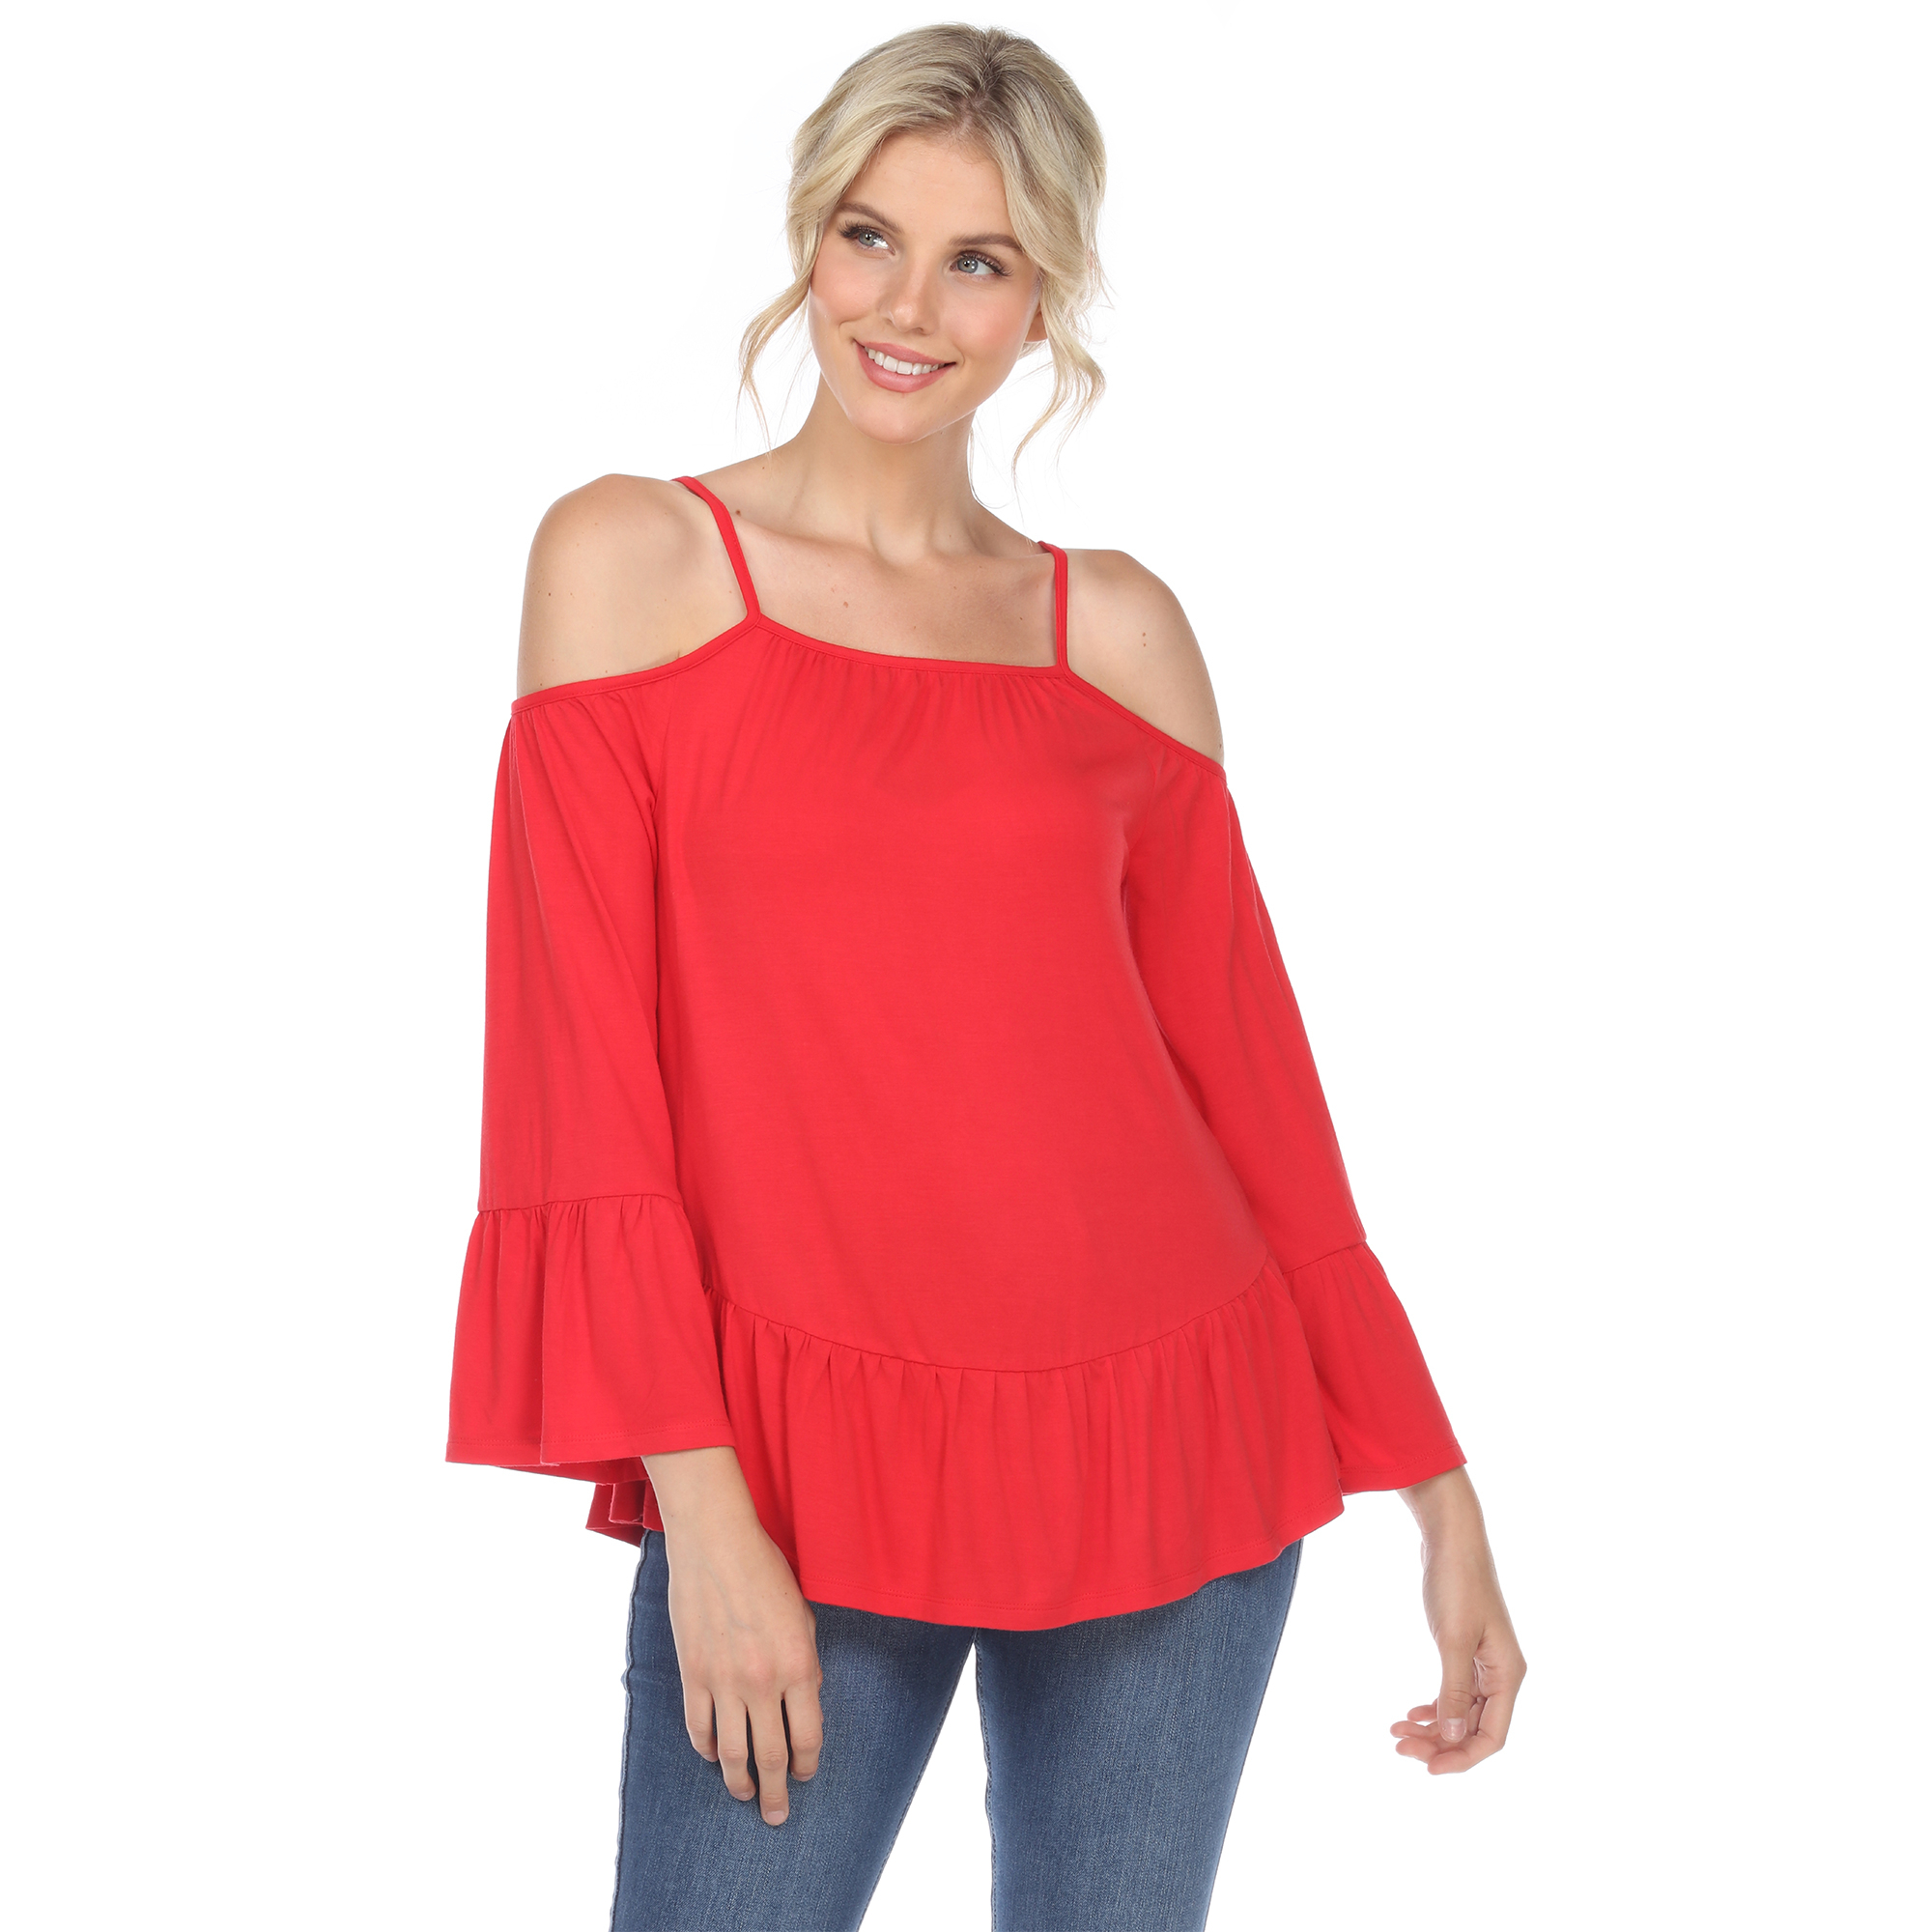 White Mark Women's Cold Shoulder Ruffle Sleeve Top - Red, 1X